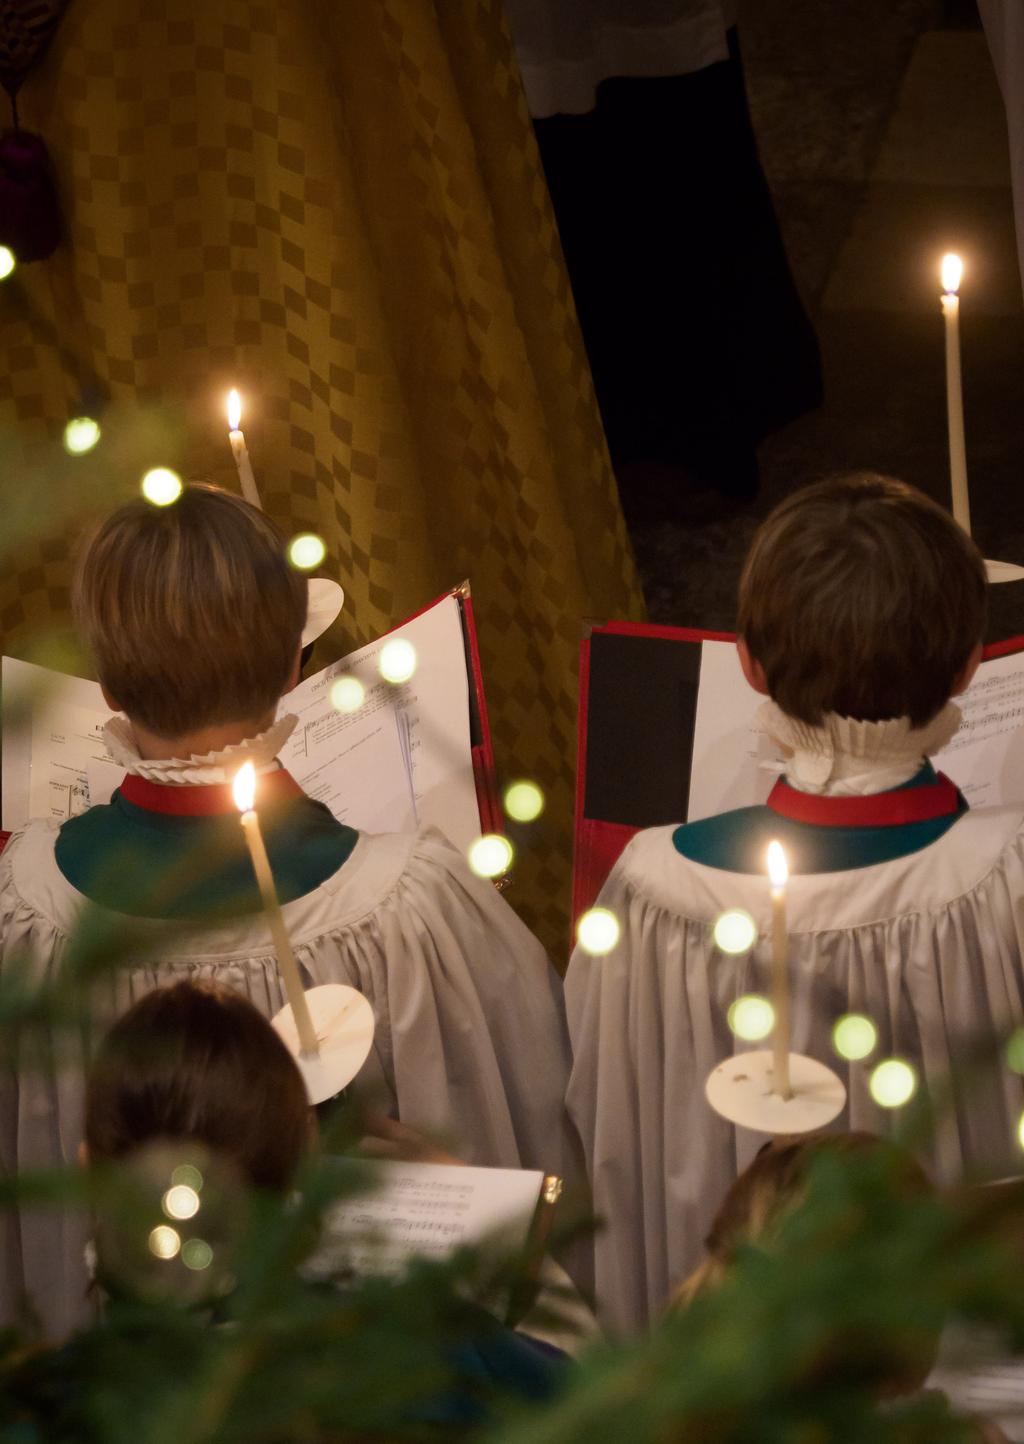 Carols by Candlelight Saturday 22 December, 19:00 Sunday 23 December, 17:00 Come and join us for a very special start to the festive season.